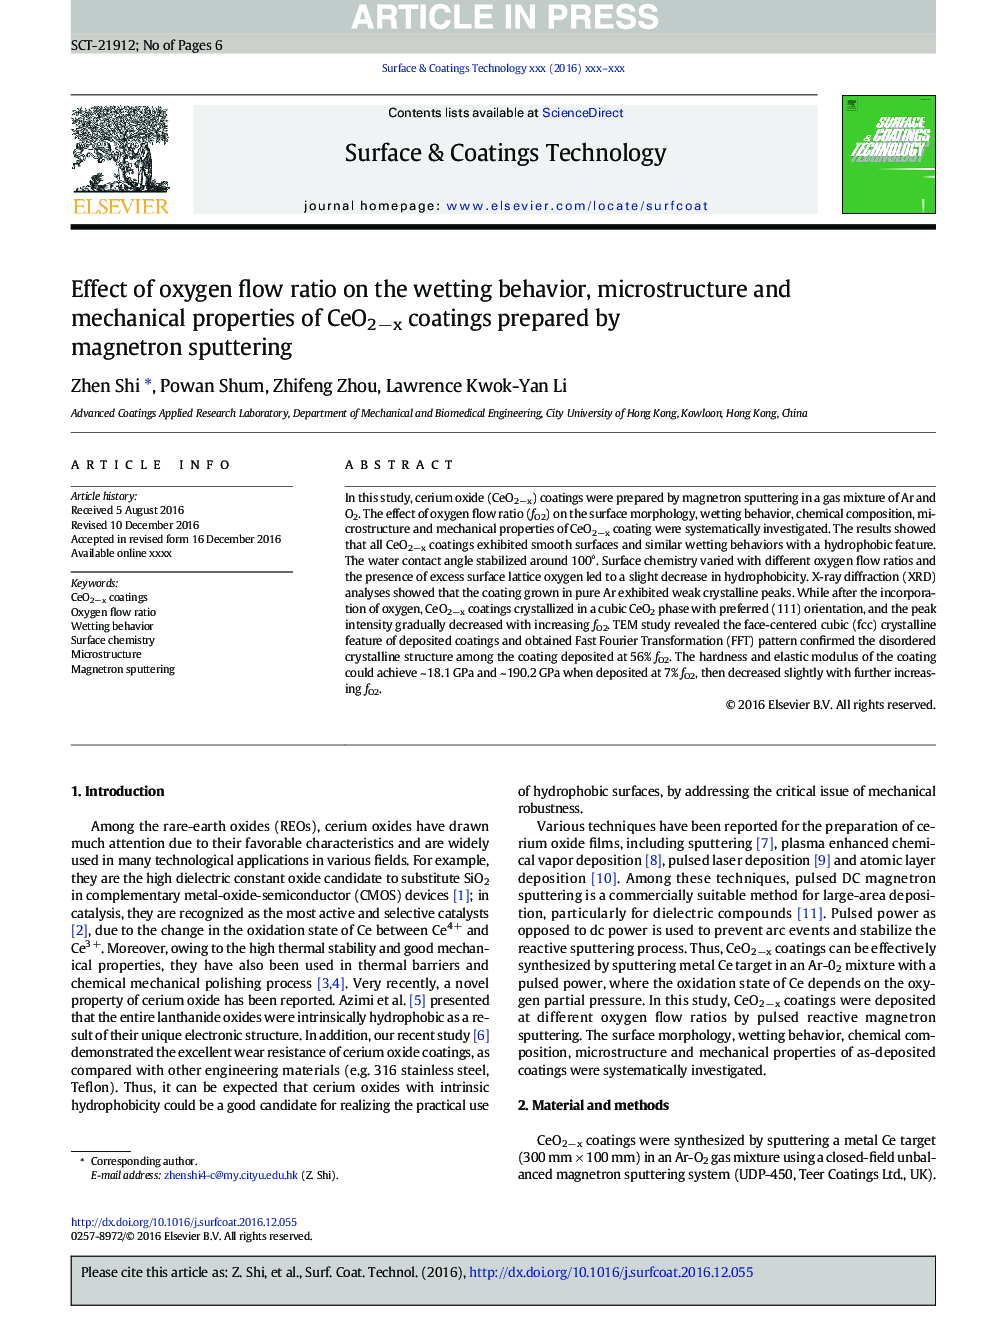 Effect of oxygen flow ratio on the wetting behavior, microstructure and mechanical properties of CeO2âx coatings prepared by magnetron sputtering